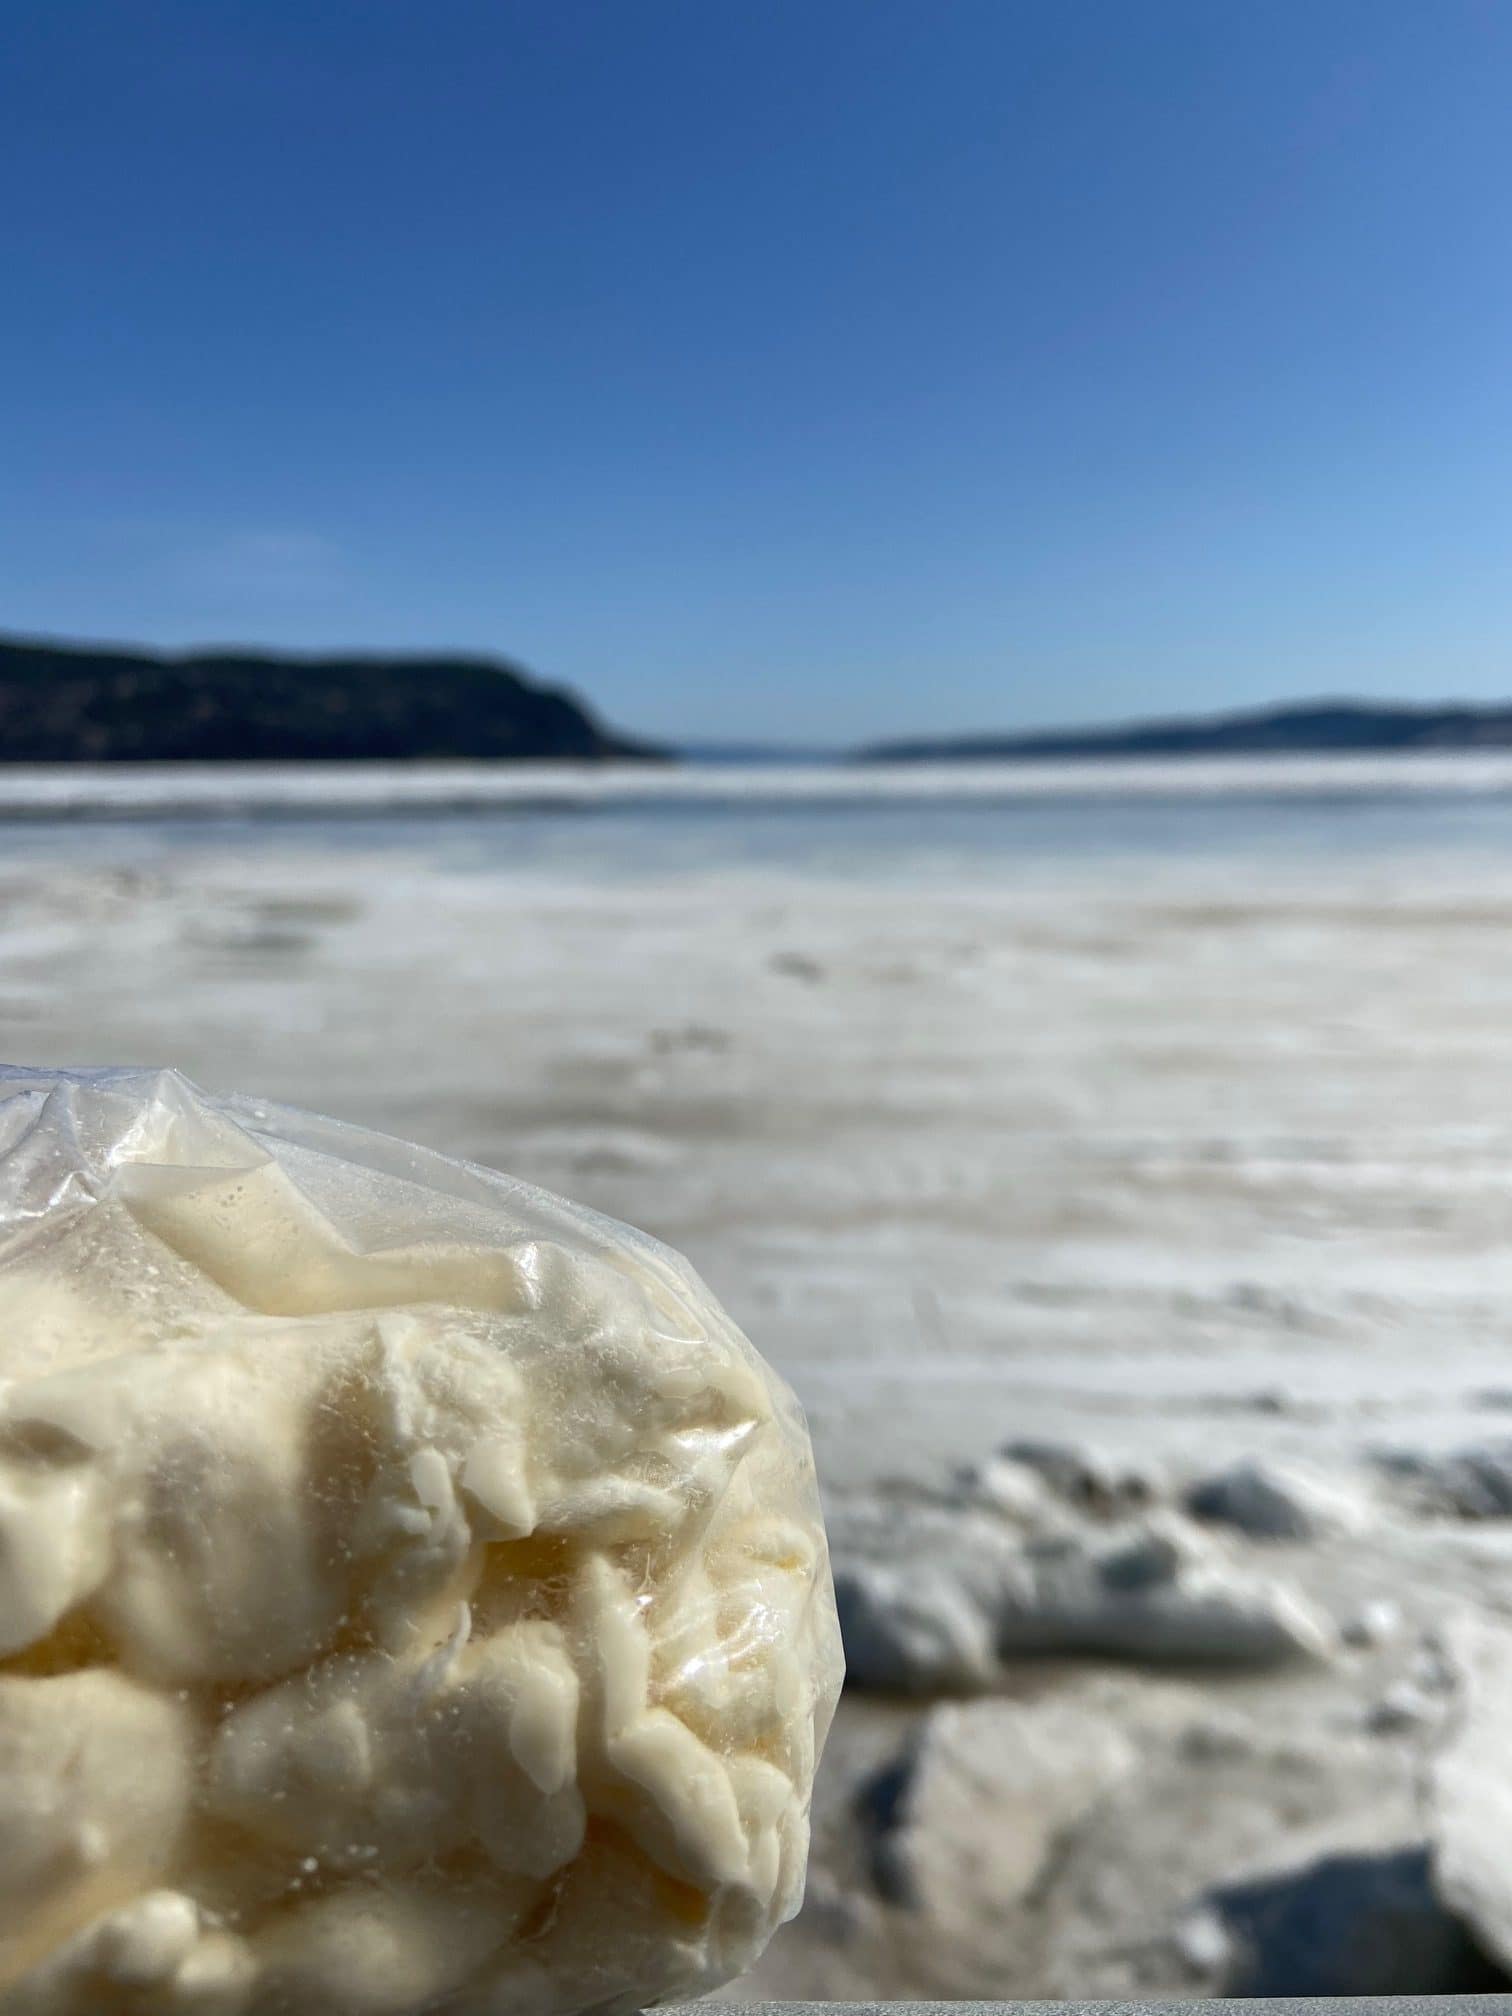 Québec cheese curds from Fromagerie Boivin